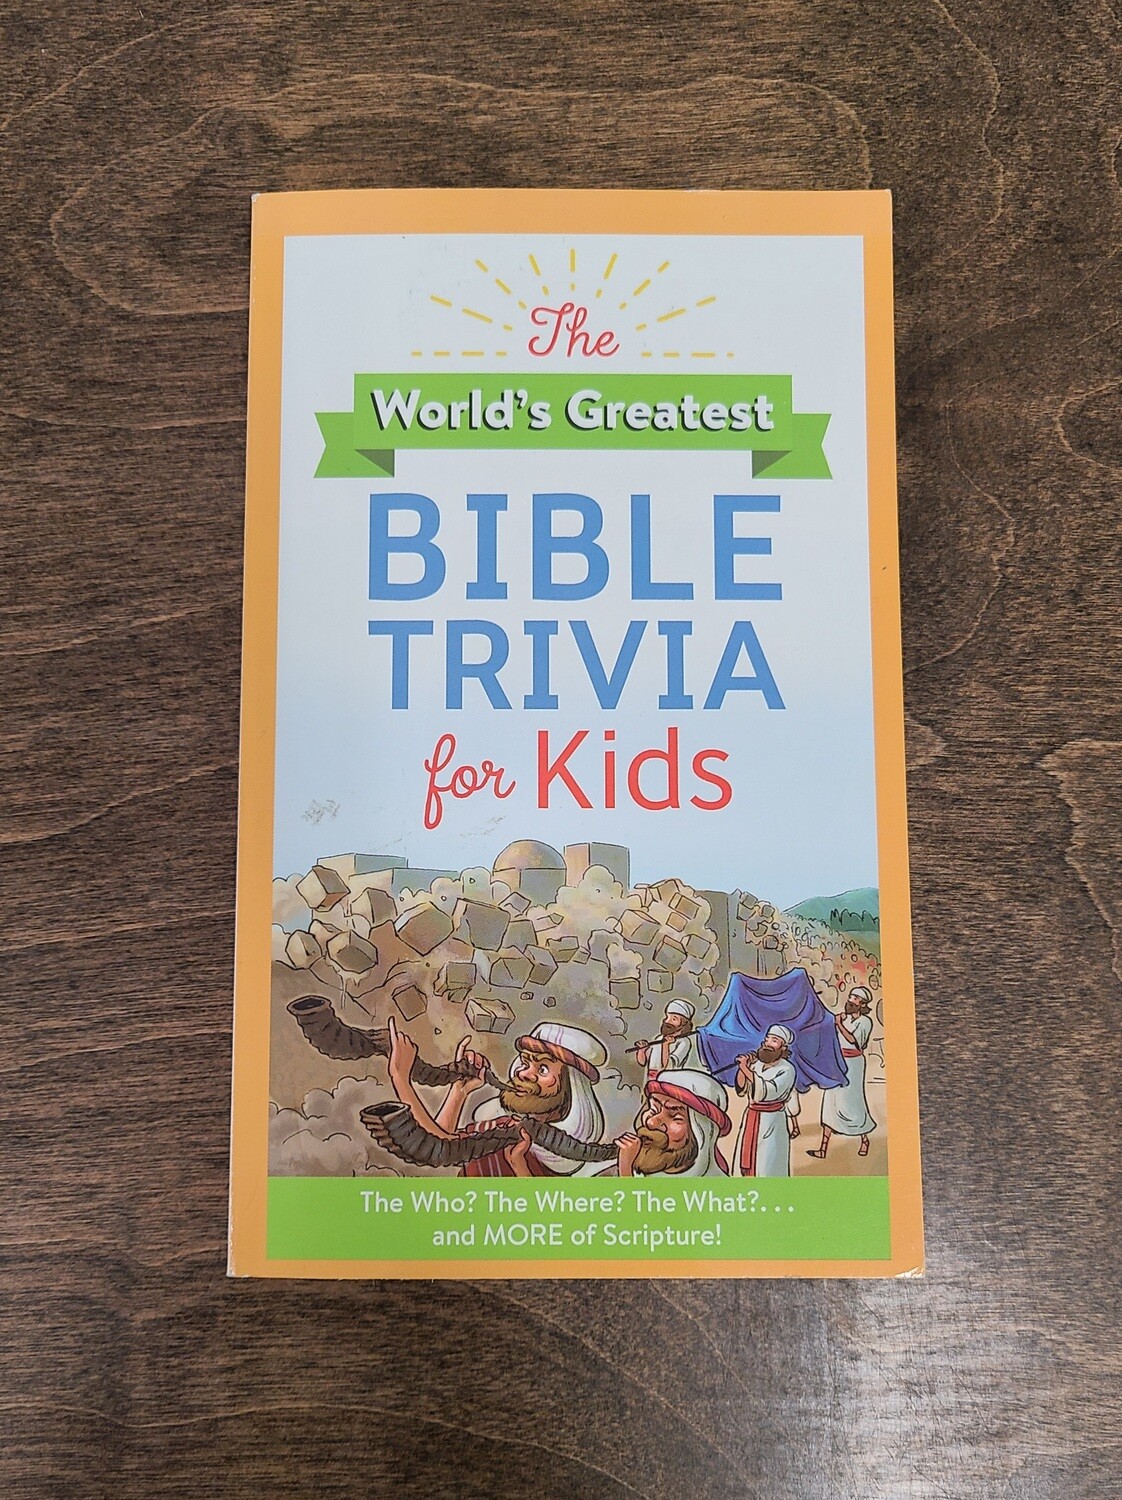 The World's Greatest Bible Trivia for Kids by Donna K. Maltese